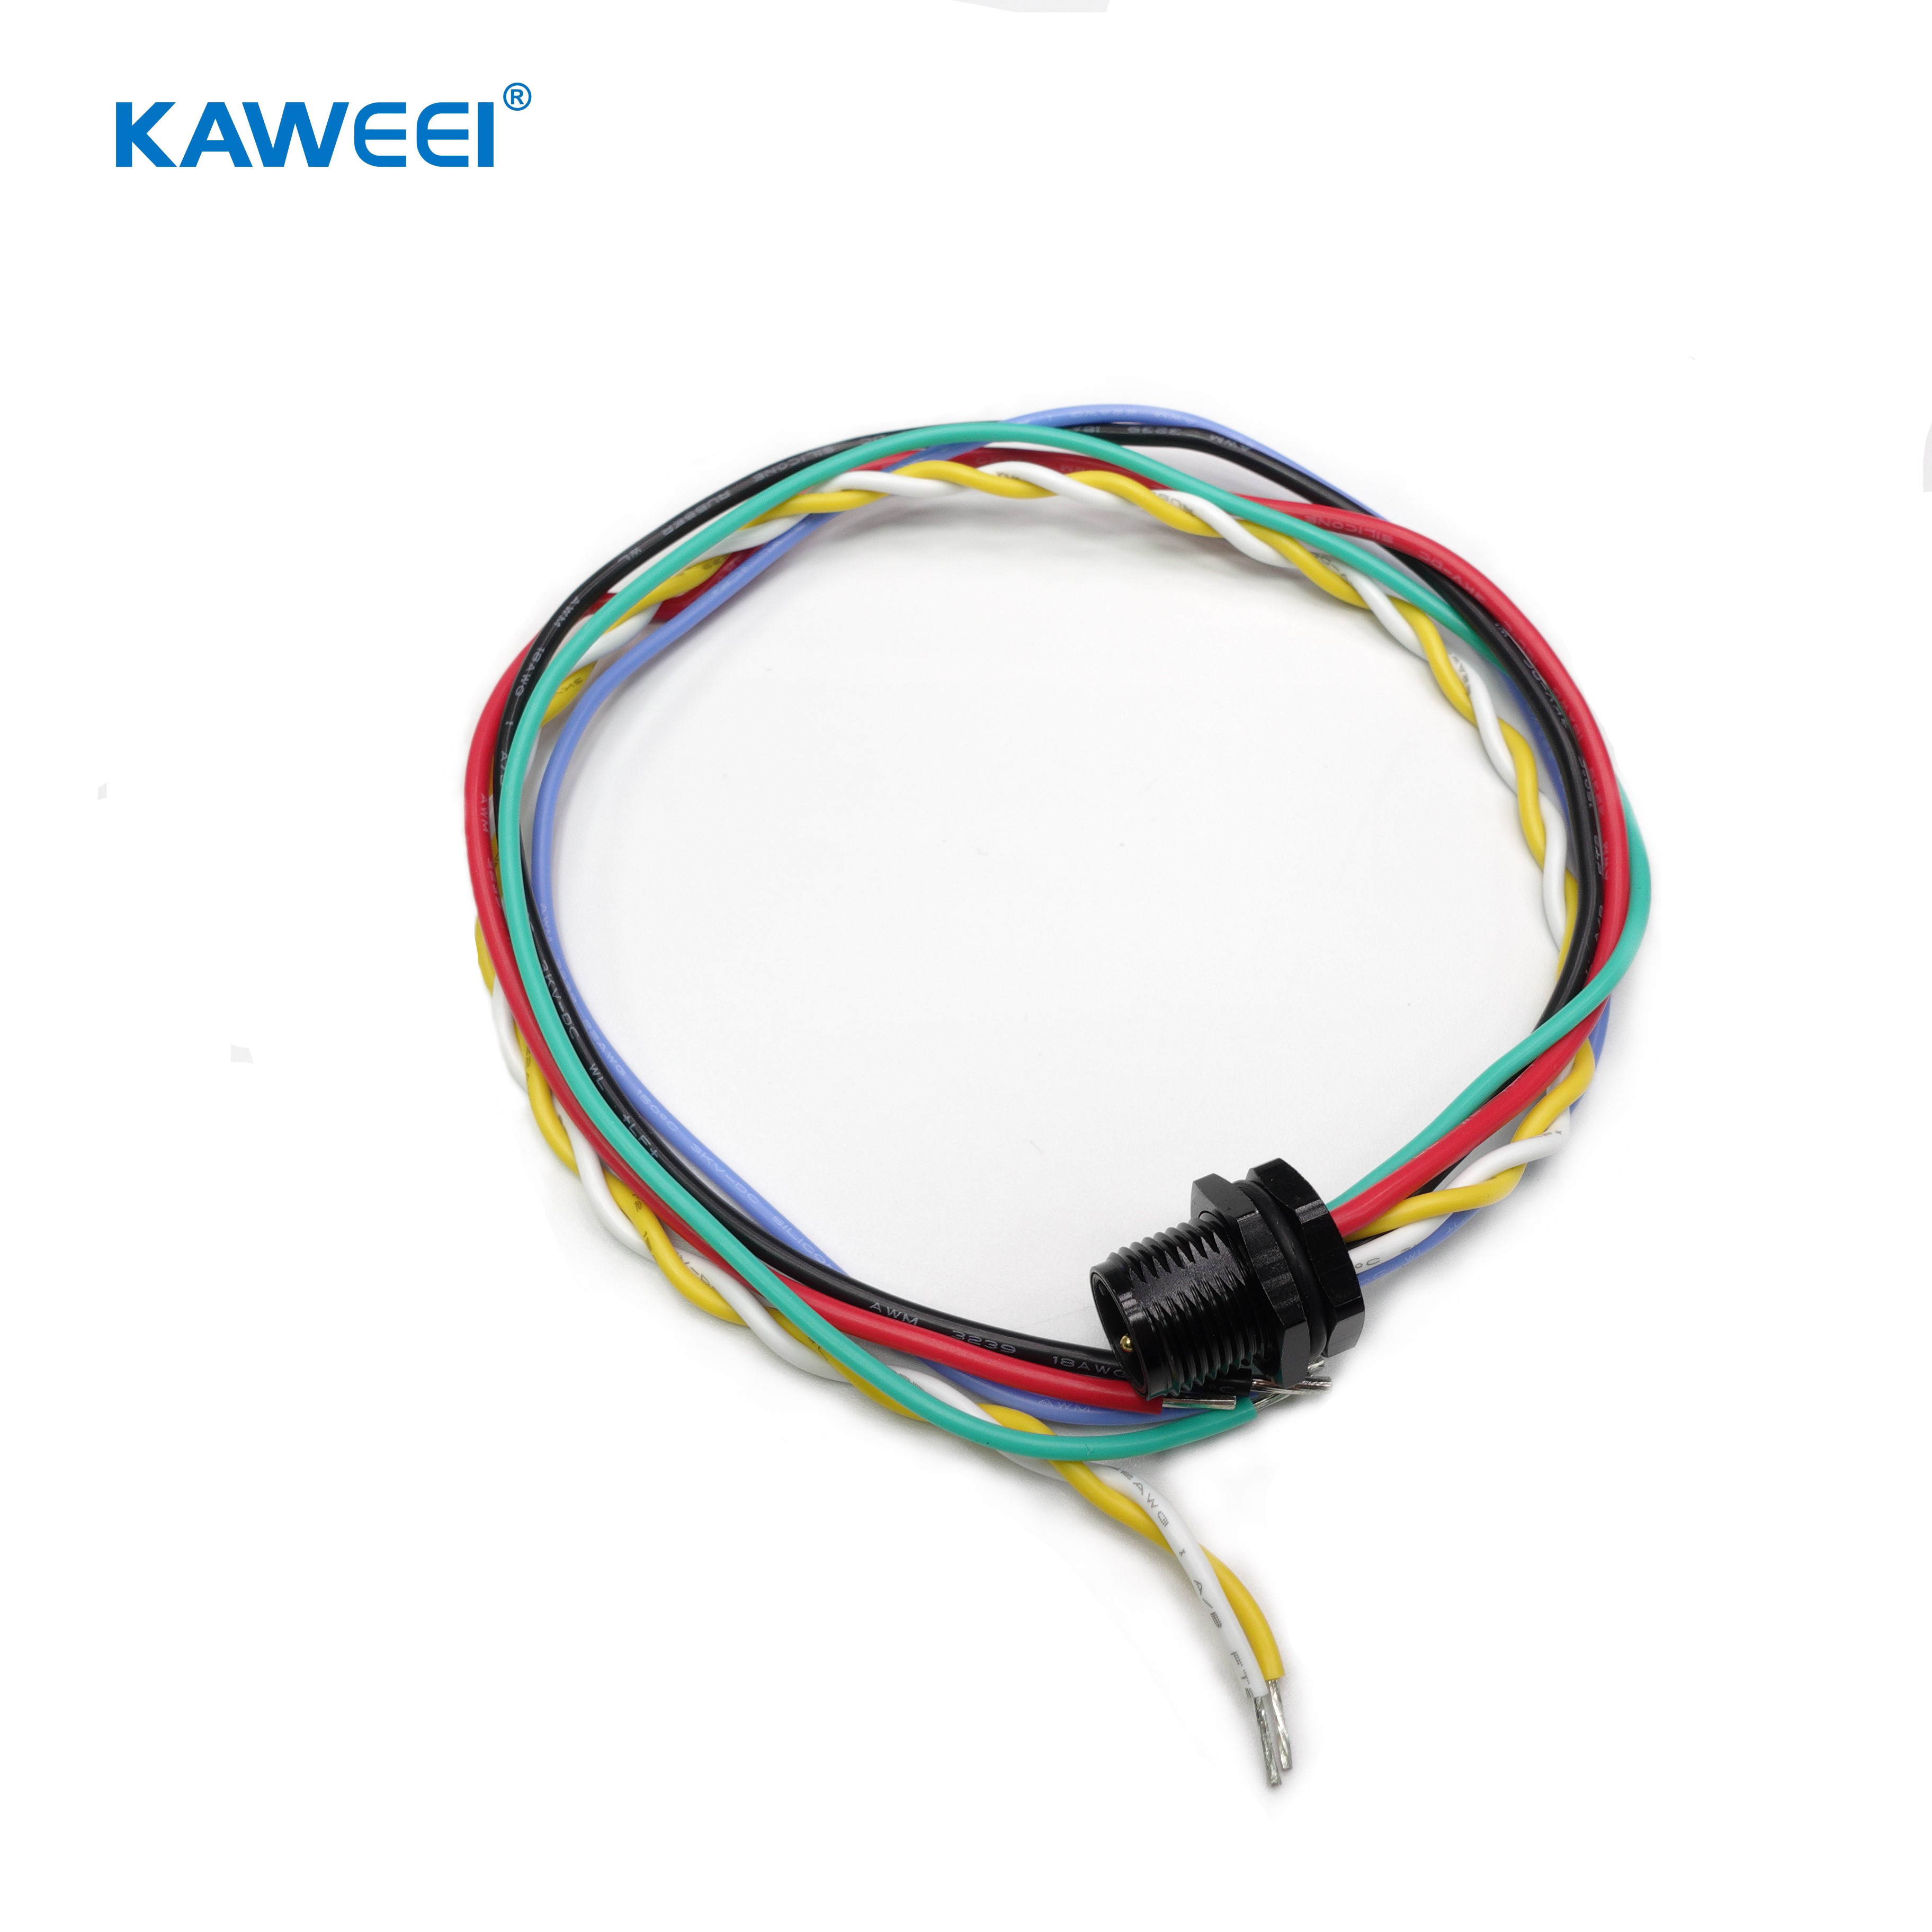 M12 4+2pin panel screw connector wiring harness